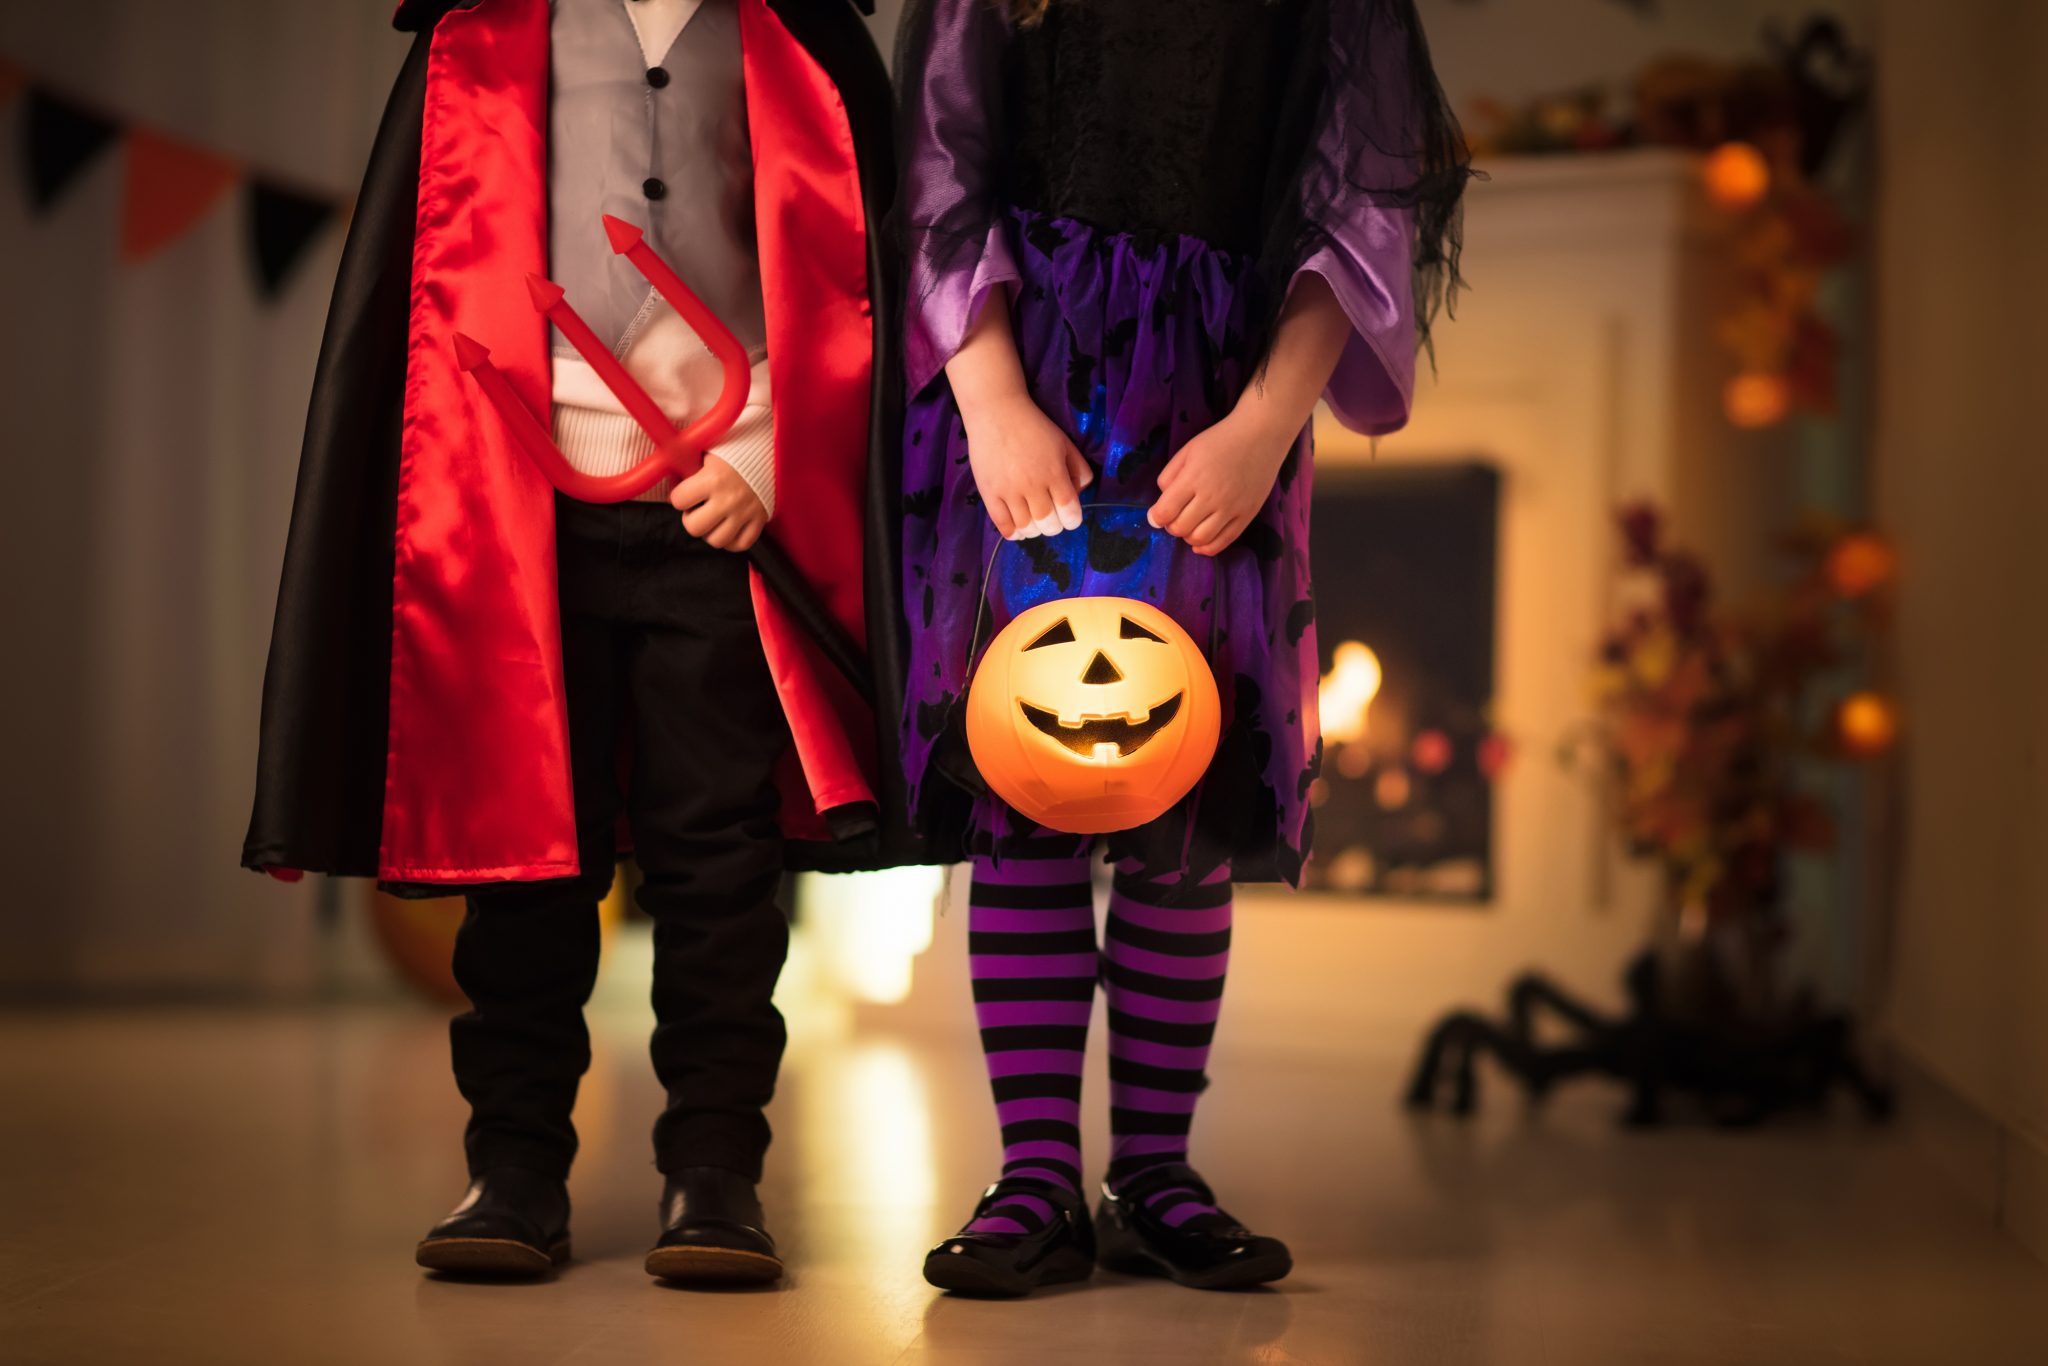 Little girl in witch costume and boy dressed up as vampire on Halloween trick or treat. Children trick or treating with candy bucket. Kids celebrate Halloween at fireplace with pumpkin and lantern.